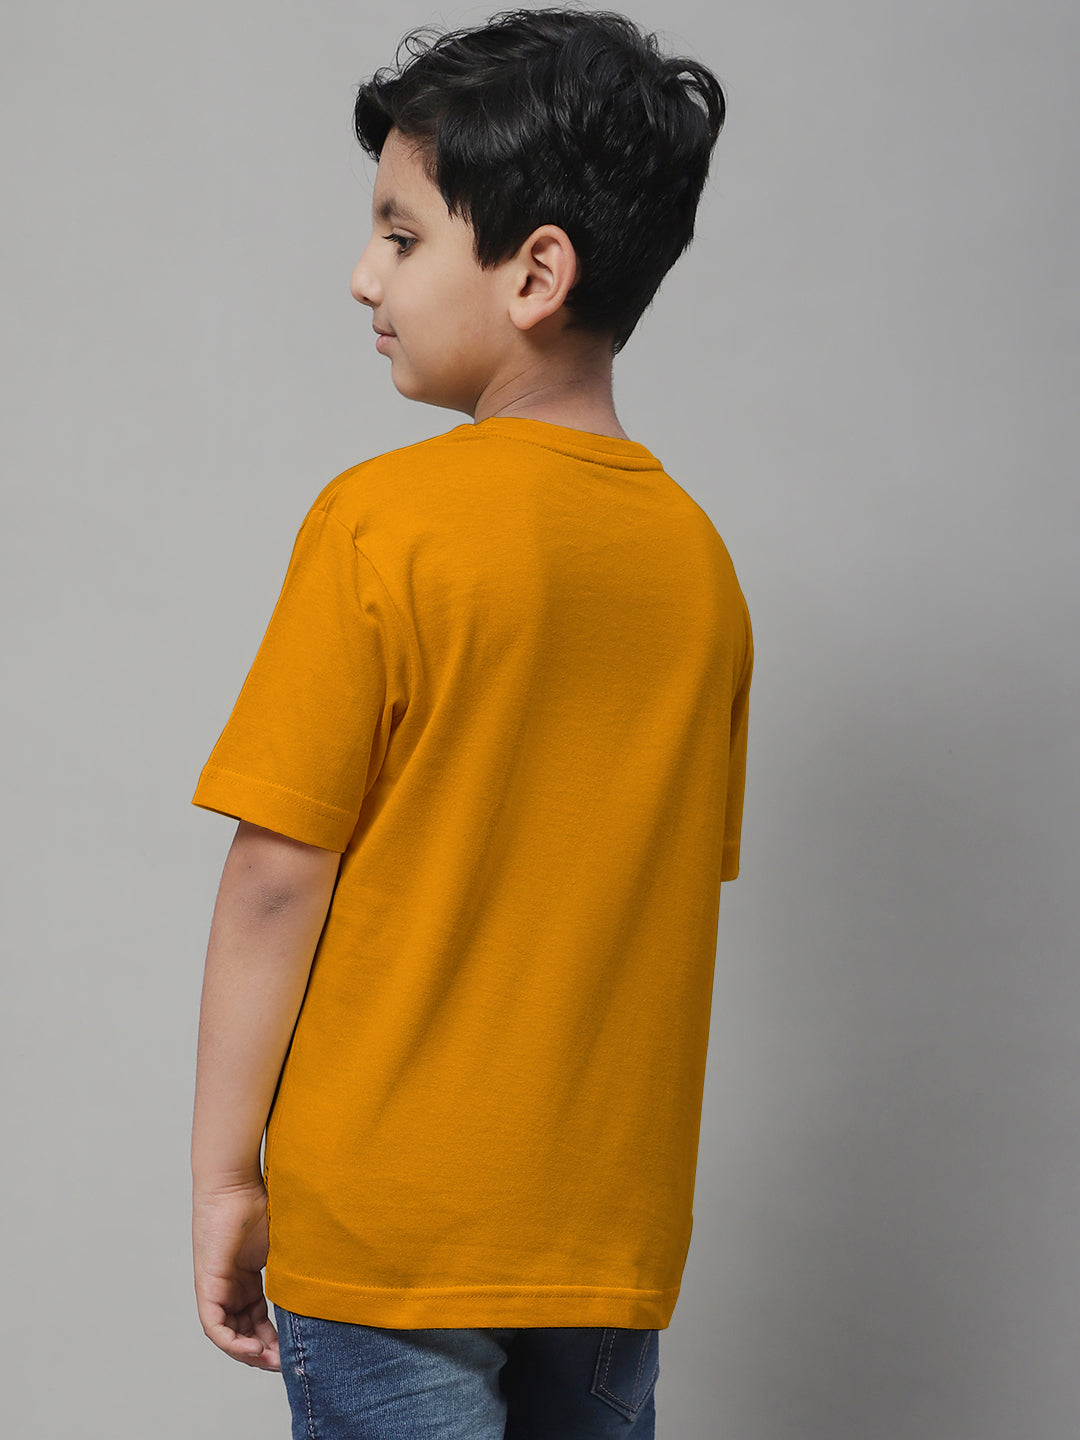 Pure Cotton Half Sleeves Round Neck 7-12Y Boys T-Shirt - Friskers